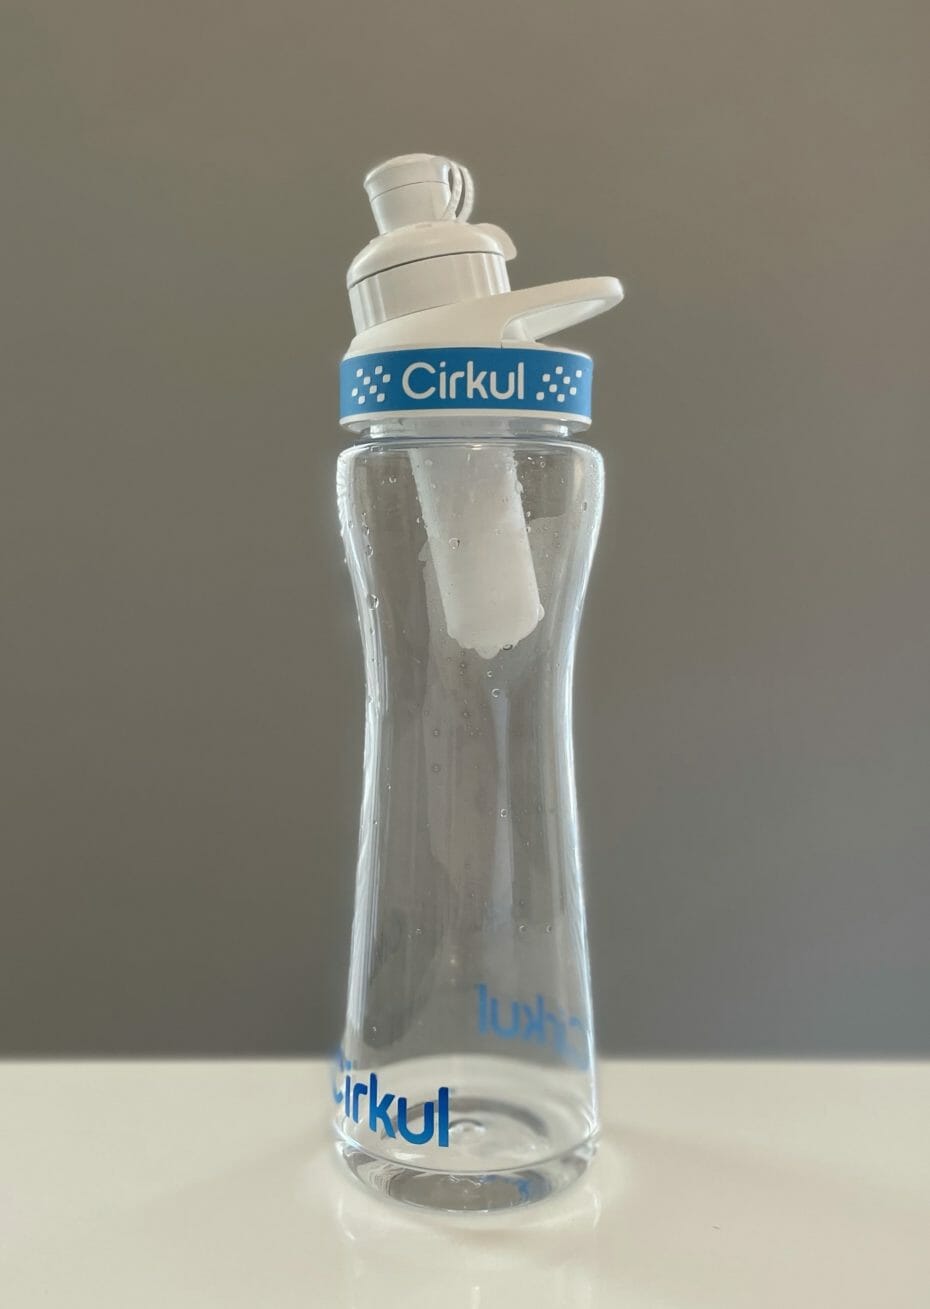 Cirkul Review: What's So Different About the Cirkul Bottle? 1